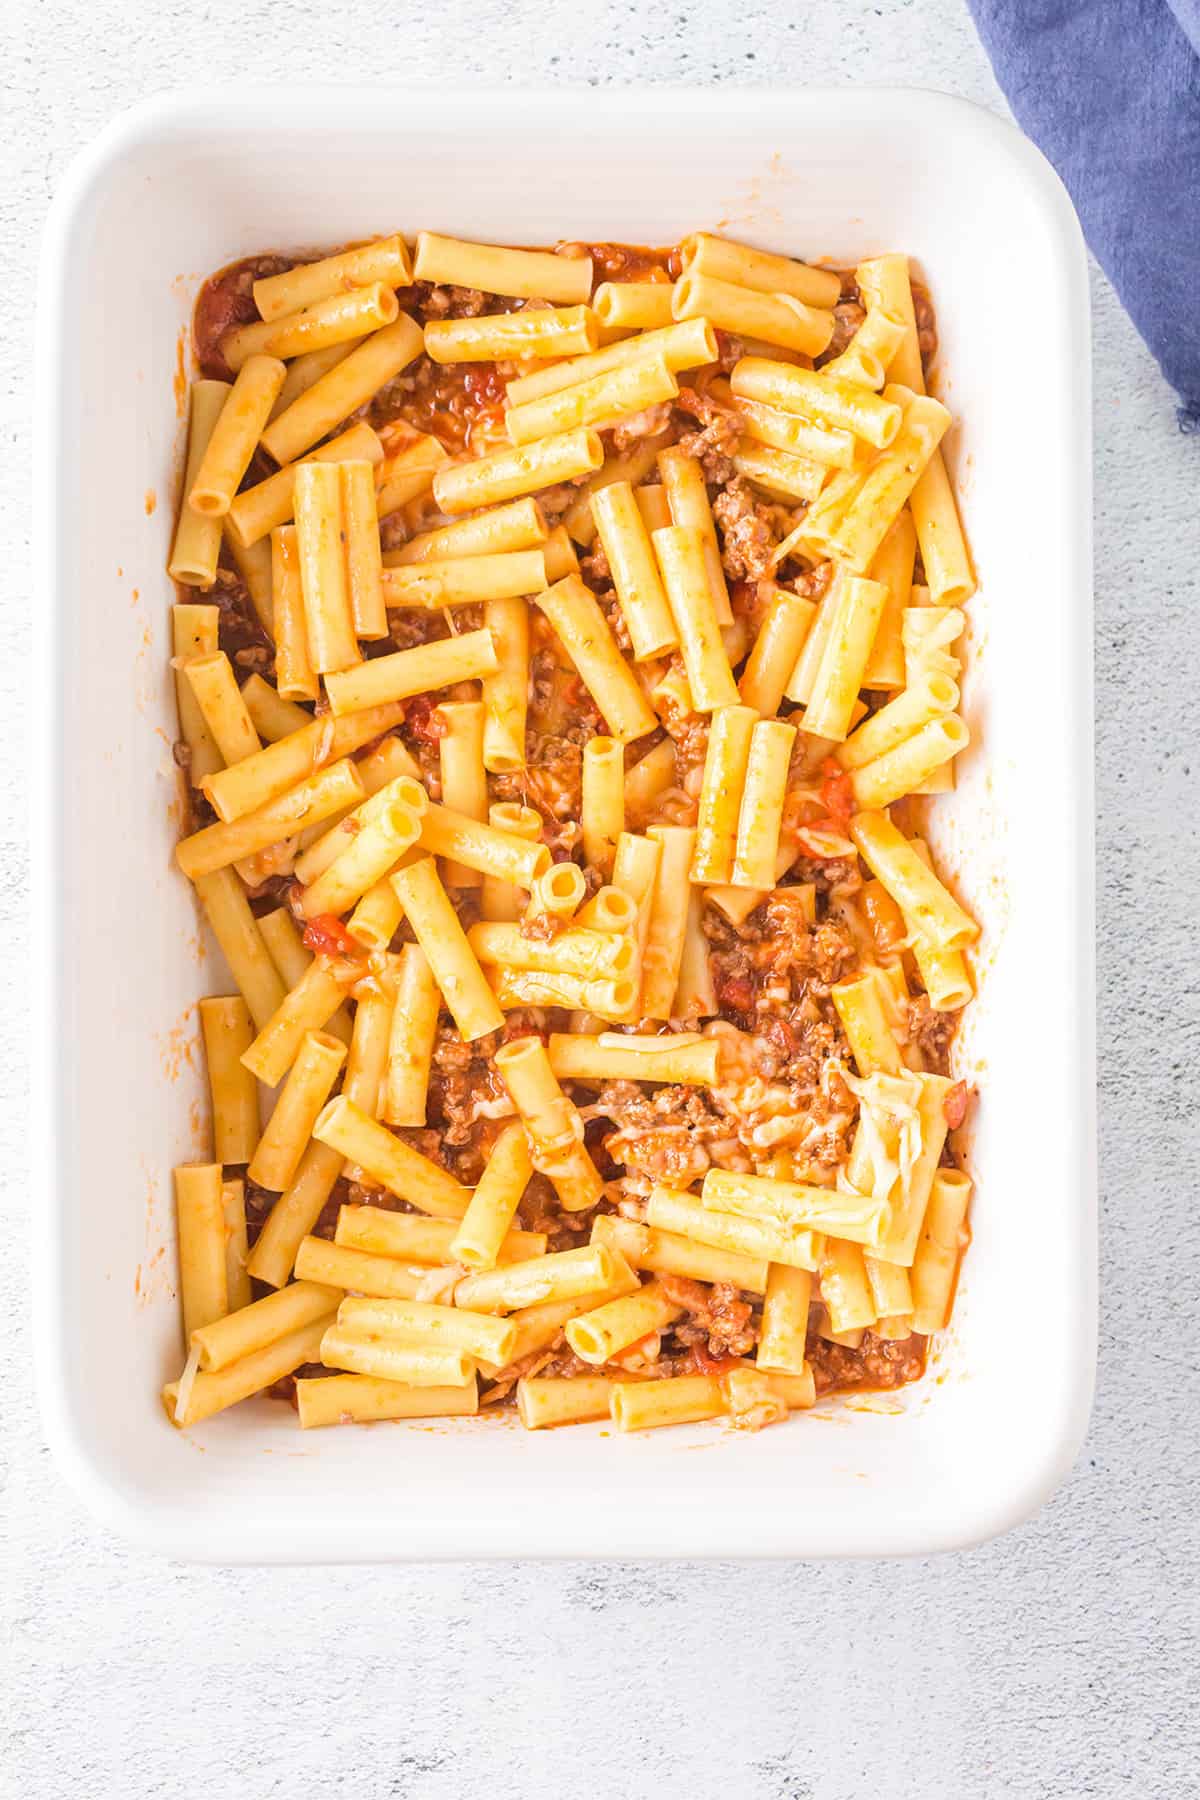 Ziti, meat sauce, and cheese mixture in a baking dish.